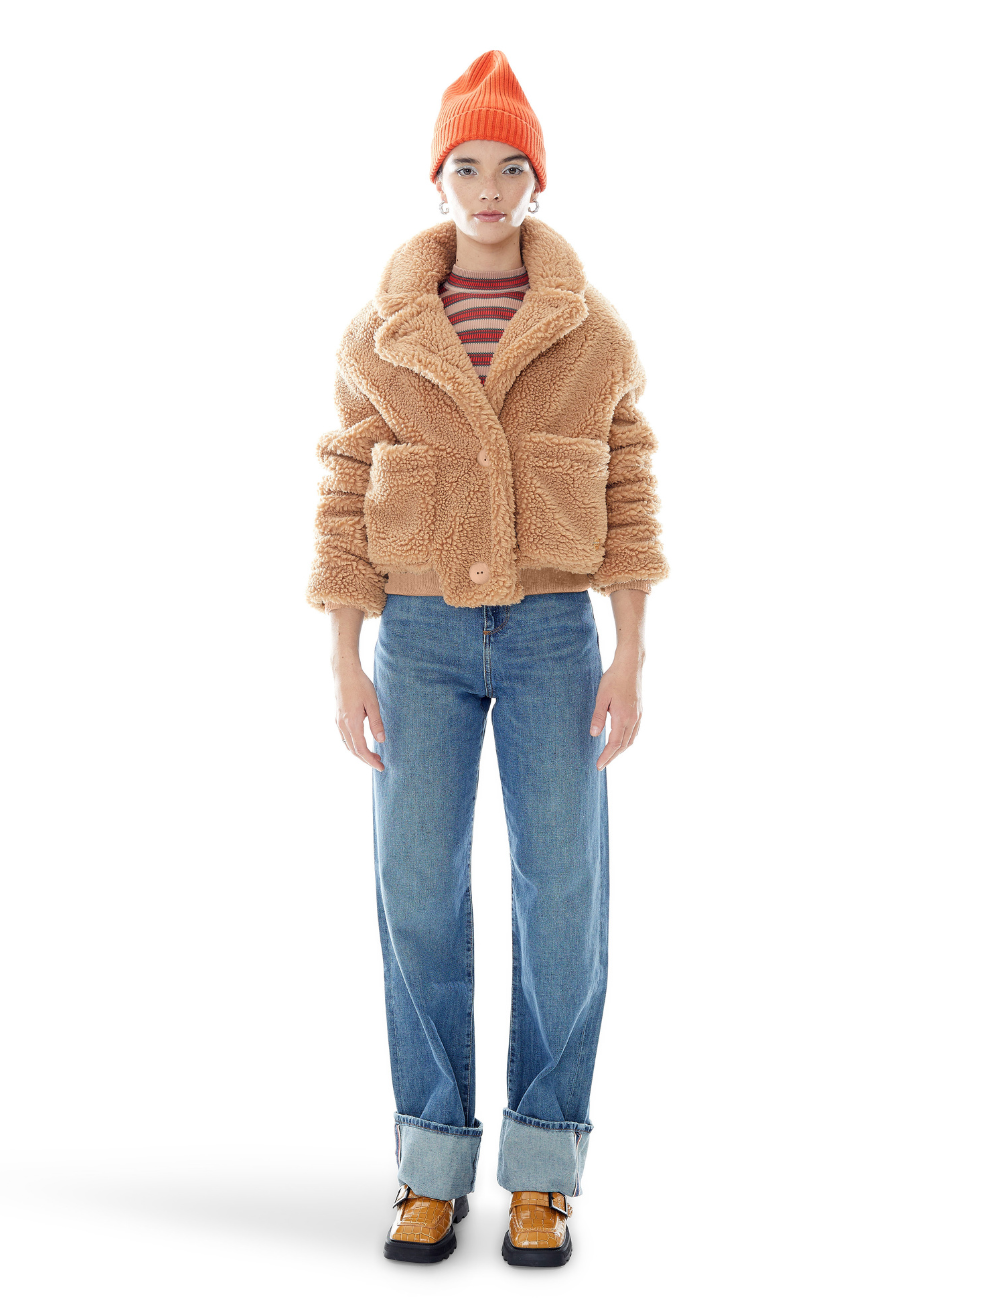 Romeo Camel Vegan Sherpa Cropped Teddy Coat Outerwear Canada Ethical Upcycled